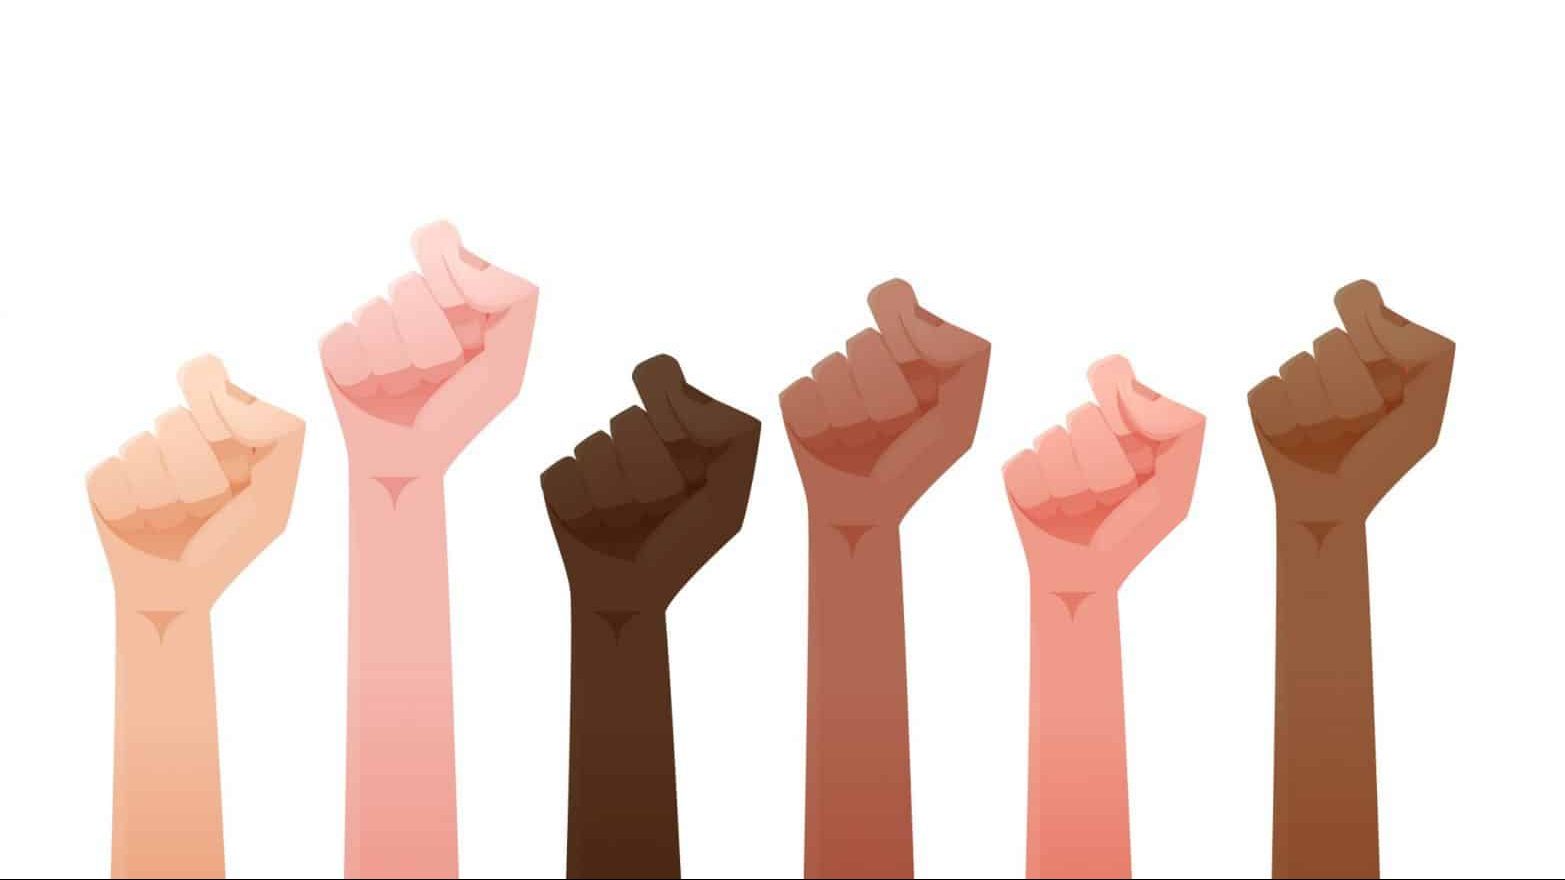 illustration of fists of people of different skin colors raised together in the air.